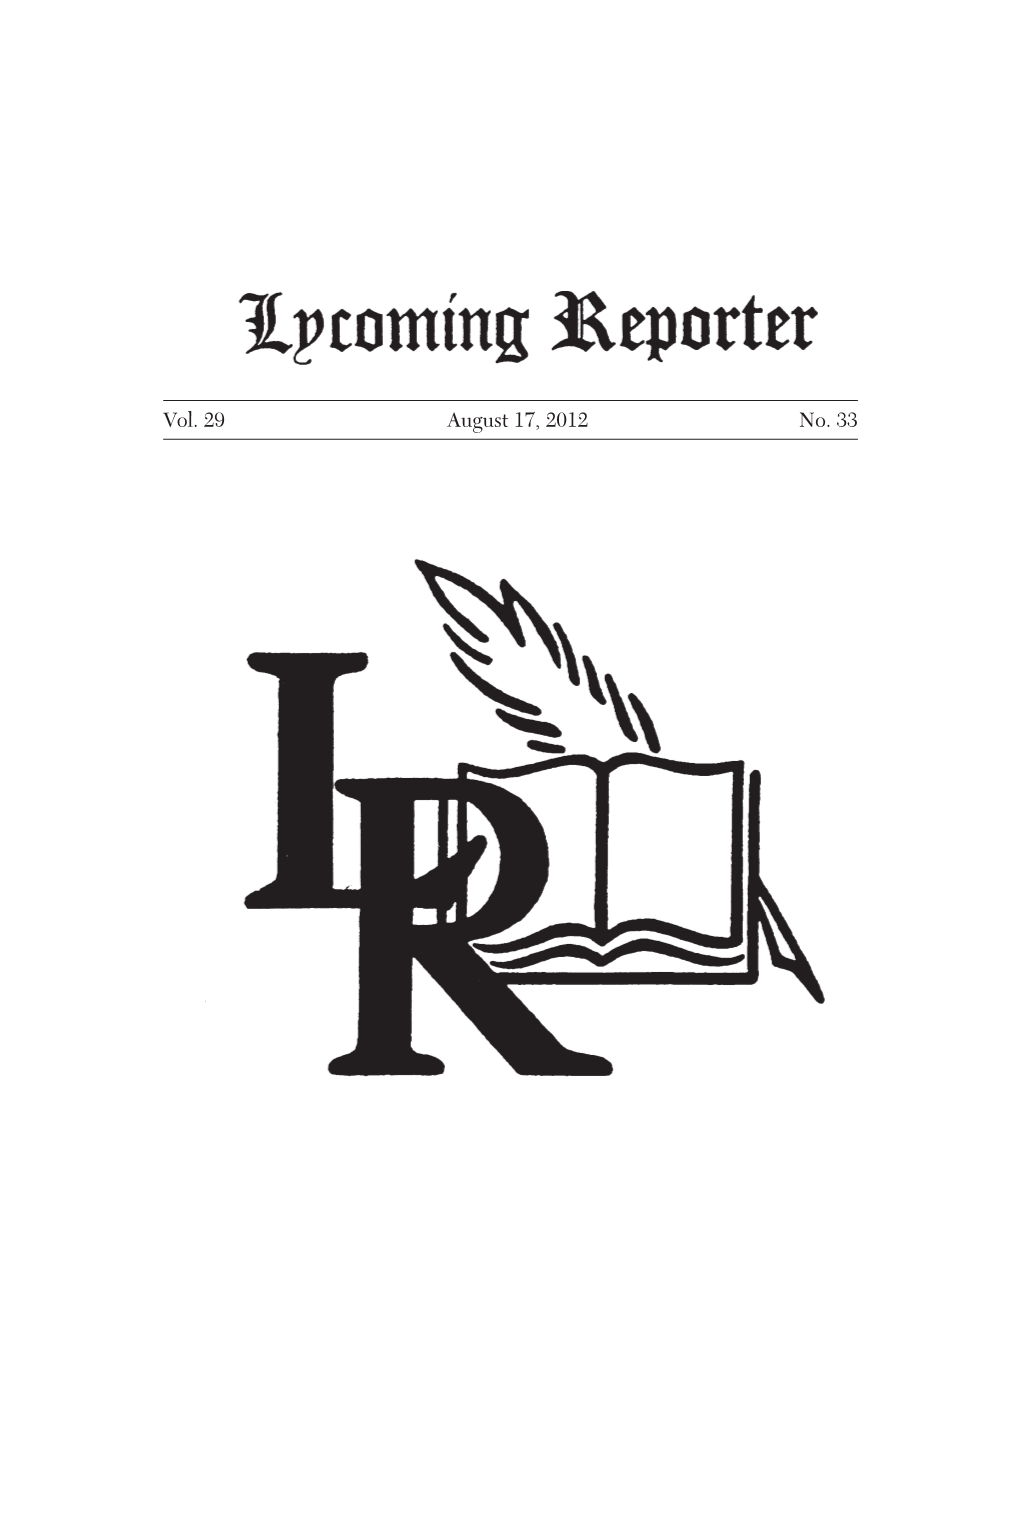 Lycoming Reporter, August 17, 2012